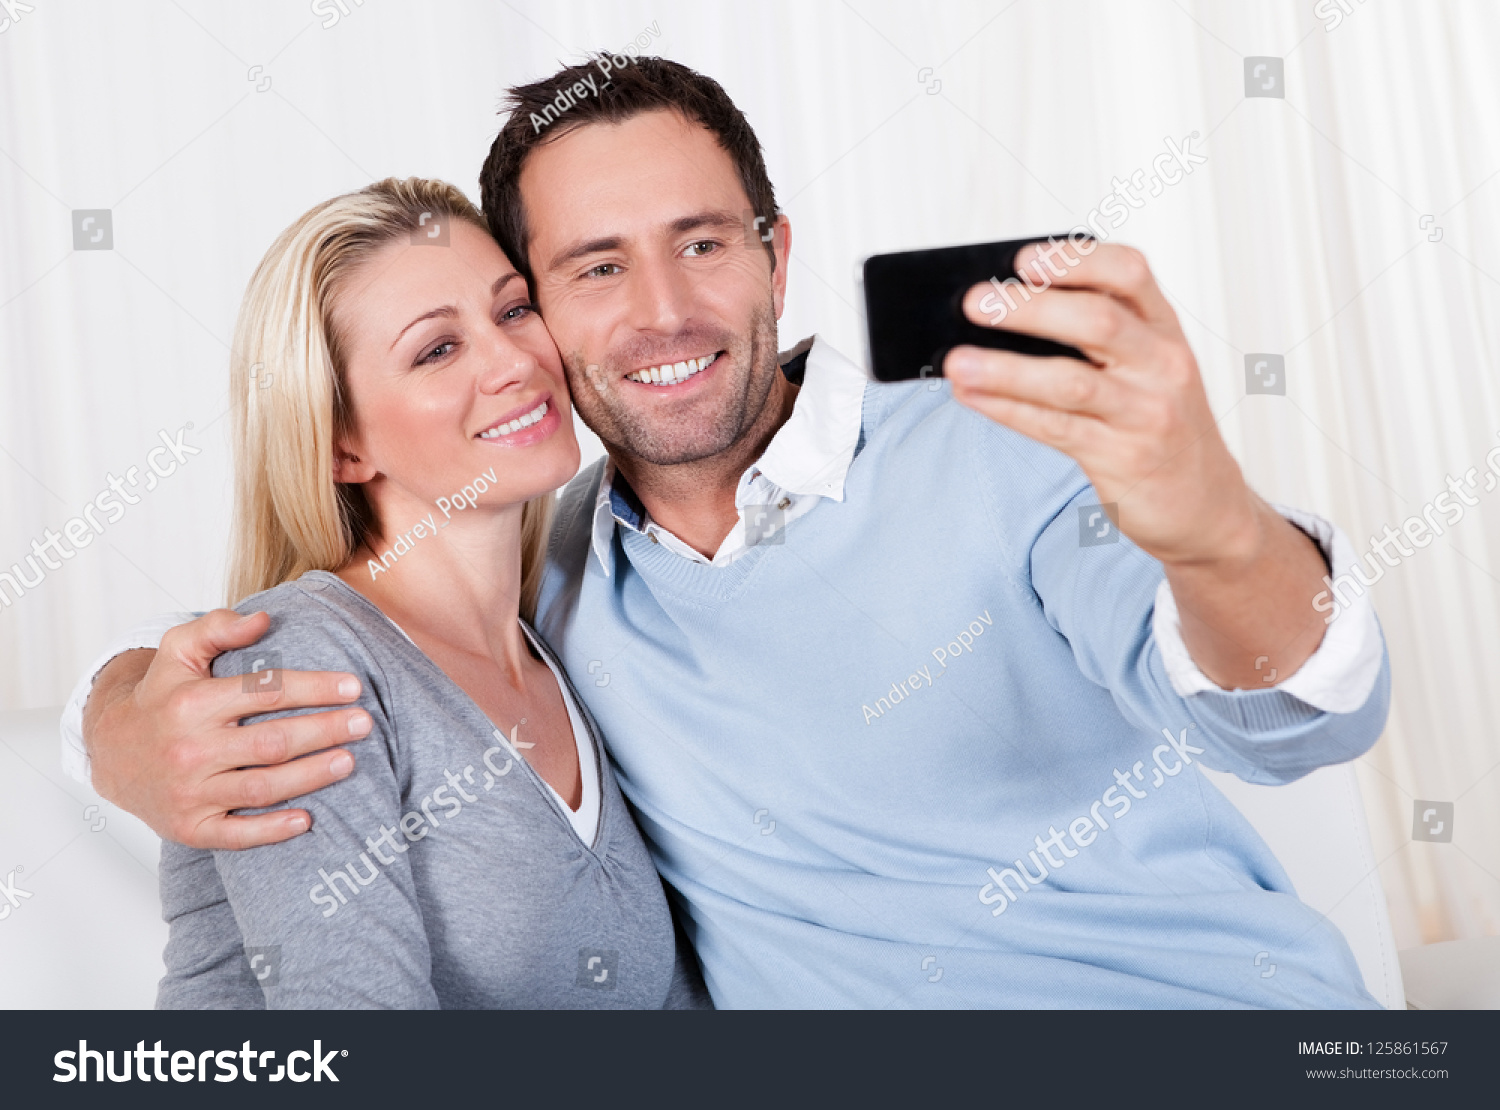 Beautiful smiling young couple photographing themselves on a mobile or smartphone posing close together with his arm around her #125861567